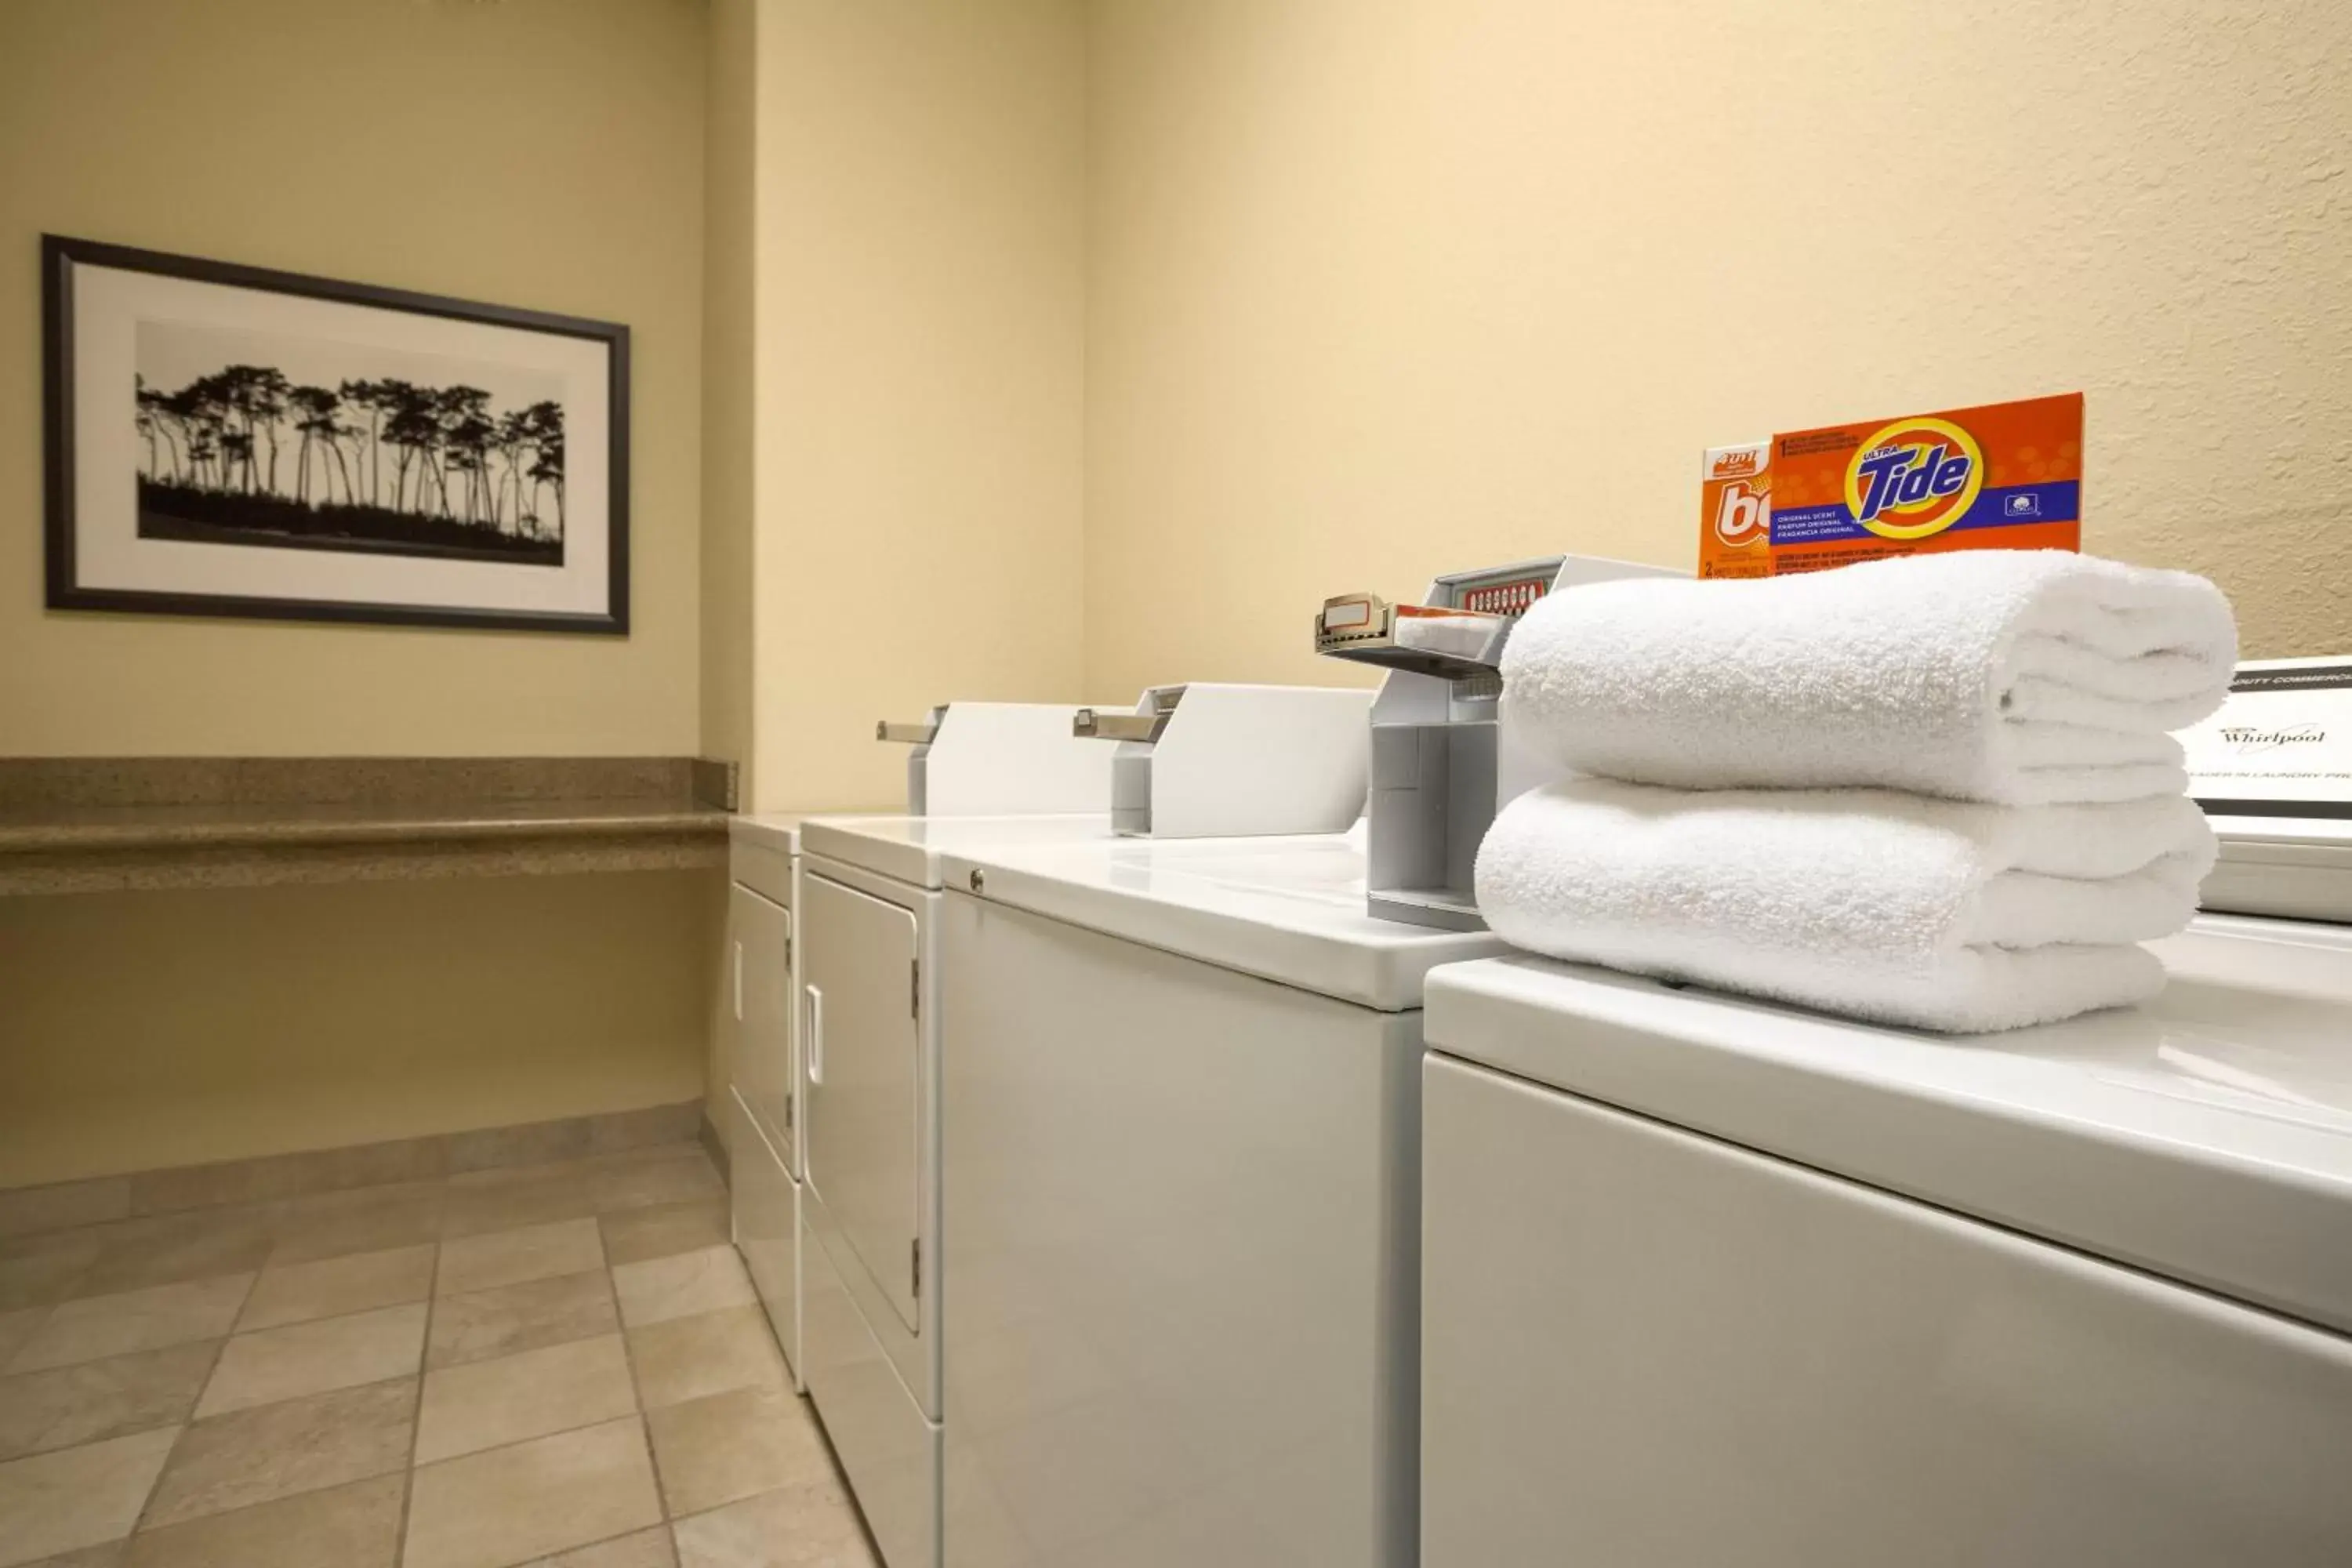 Area and facilities in Country Inn & Suites by Radisson, Kalamazoo, MI